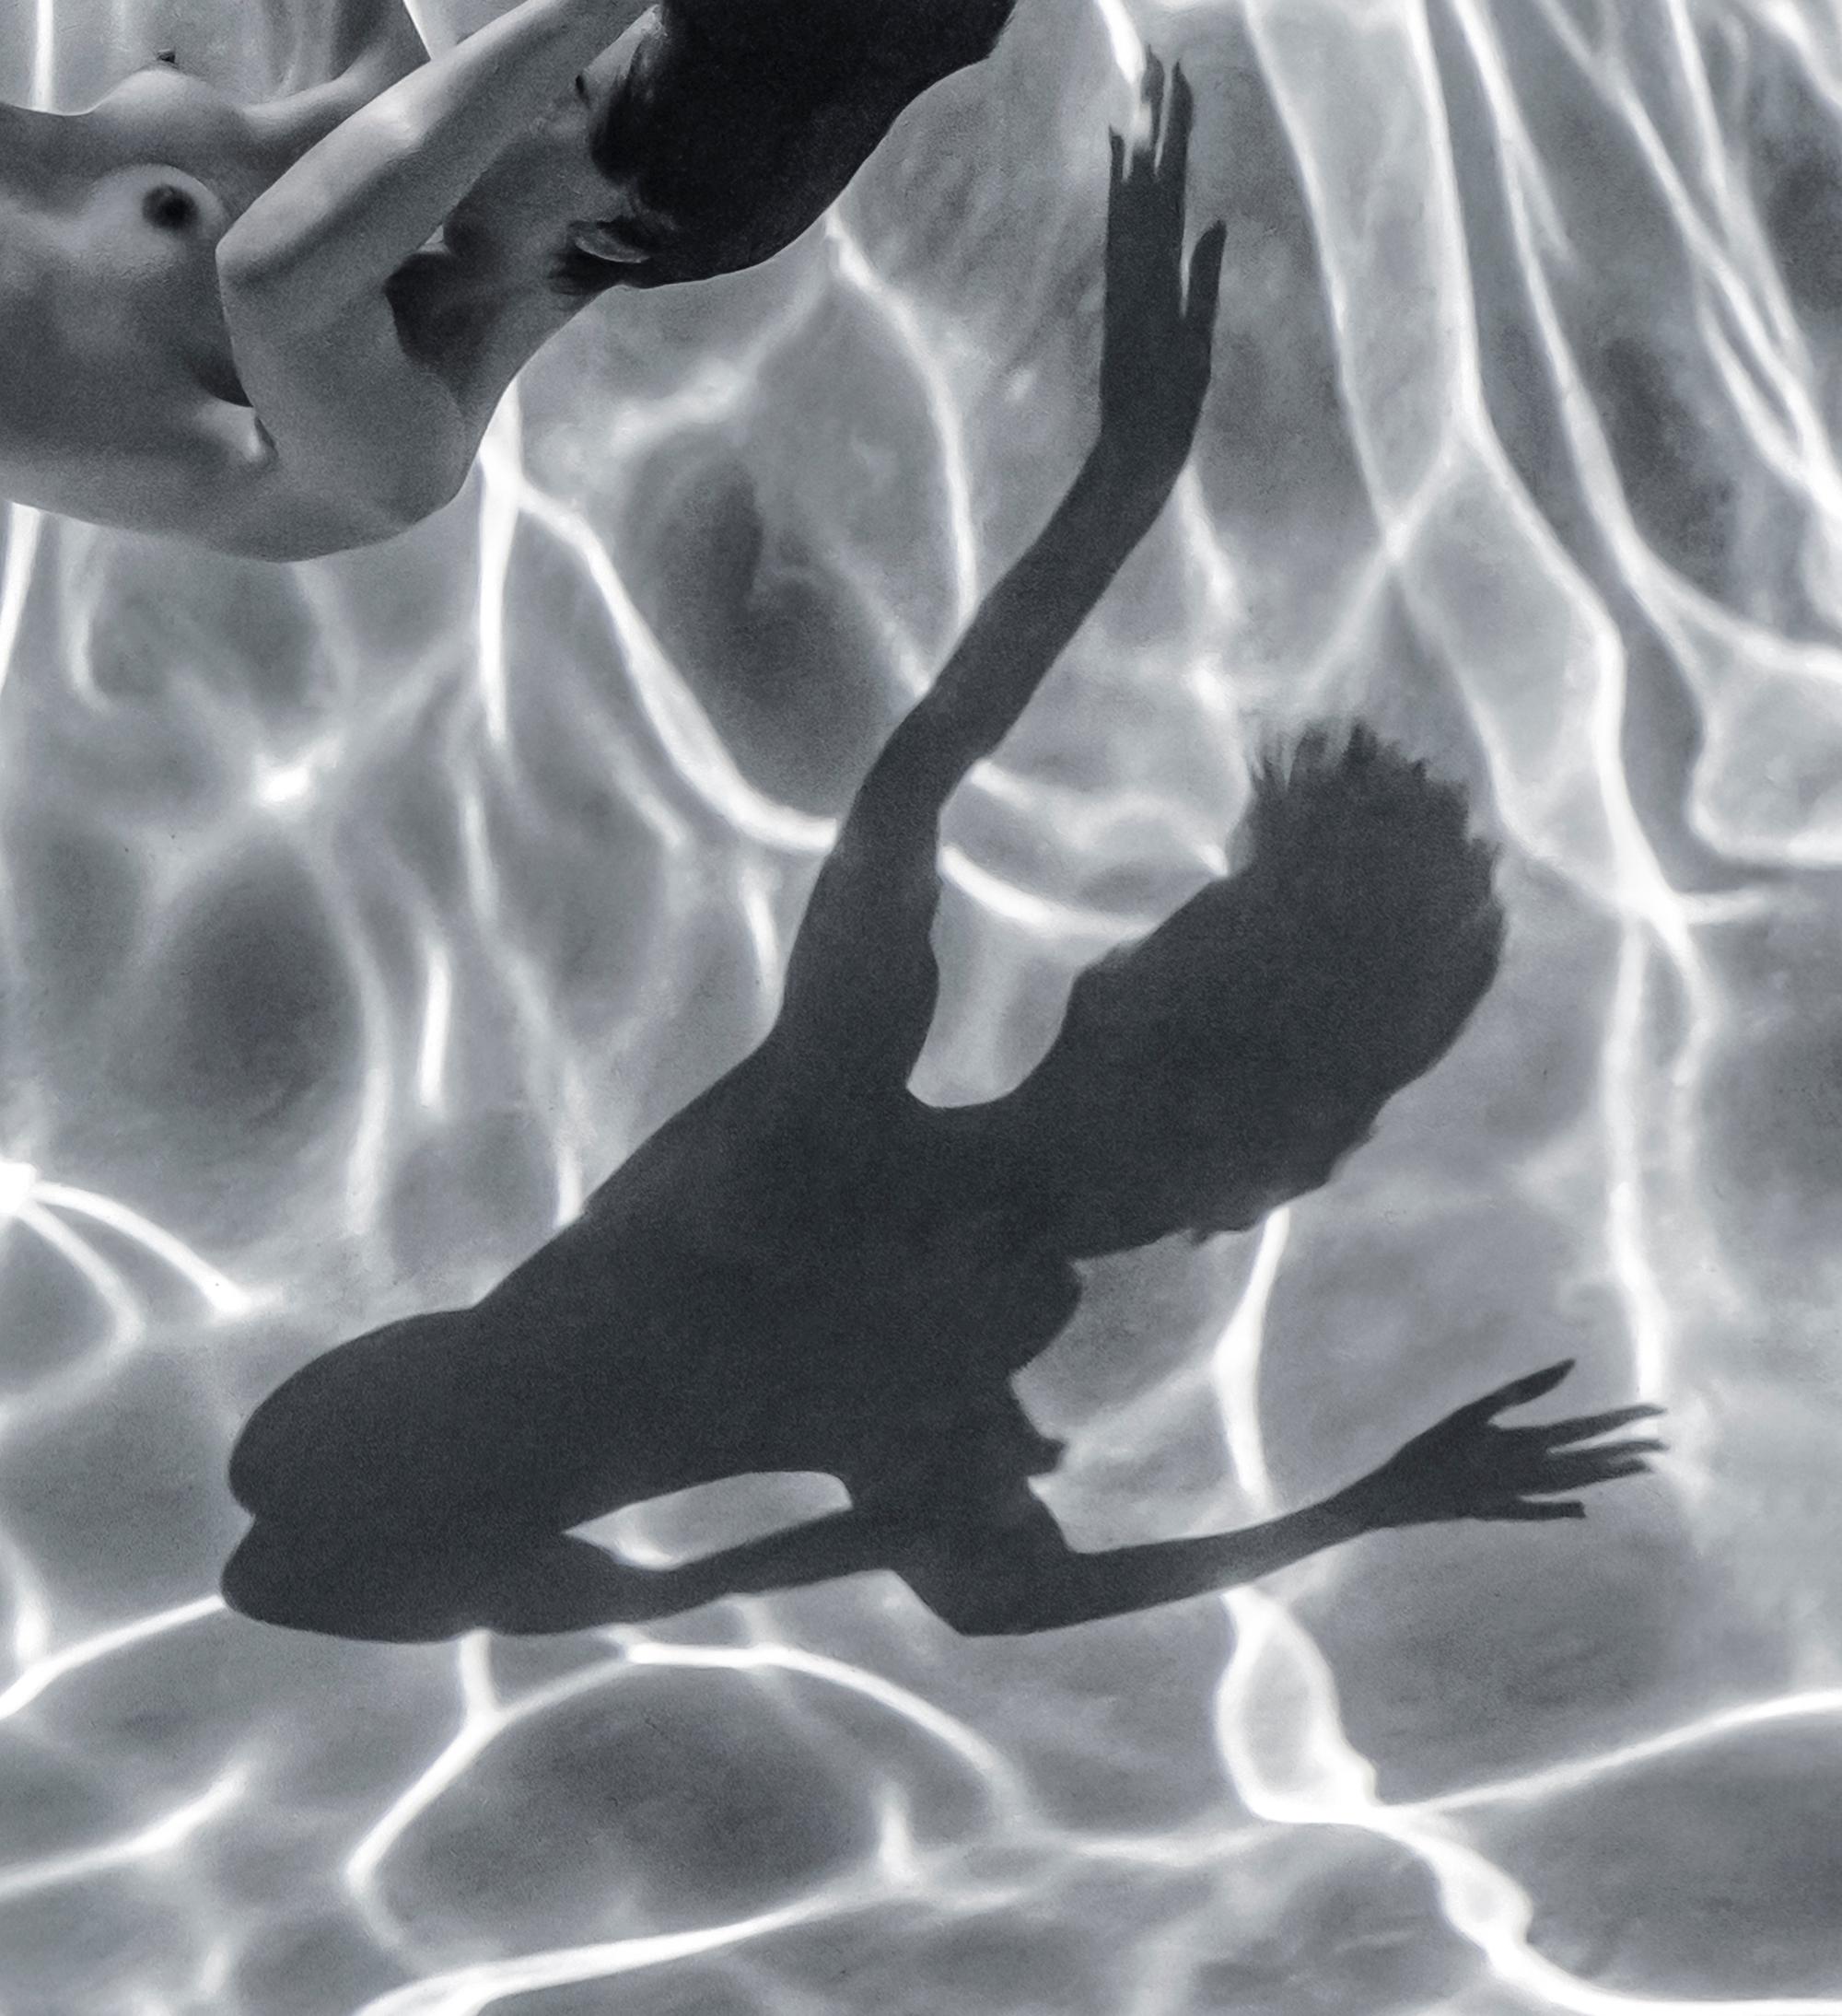 A beautiful  and mysterious underwater black and white photograph of a young naked woman slowly falling down through the pool water. Her strong body drops a bizarre shadow on the bottom of the pool covered with net of ripple shades and glares. 
This